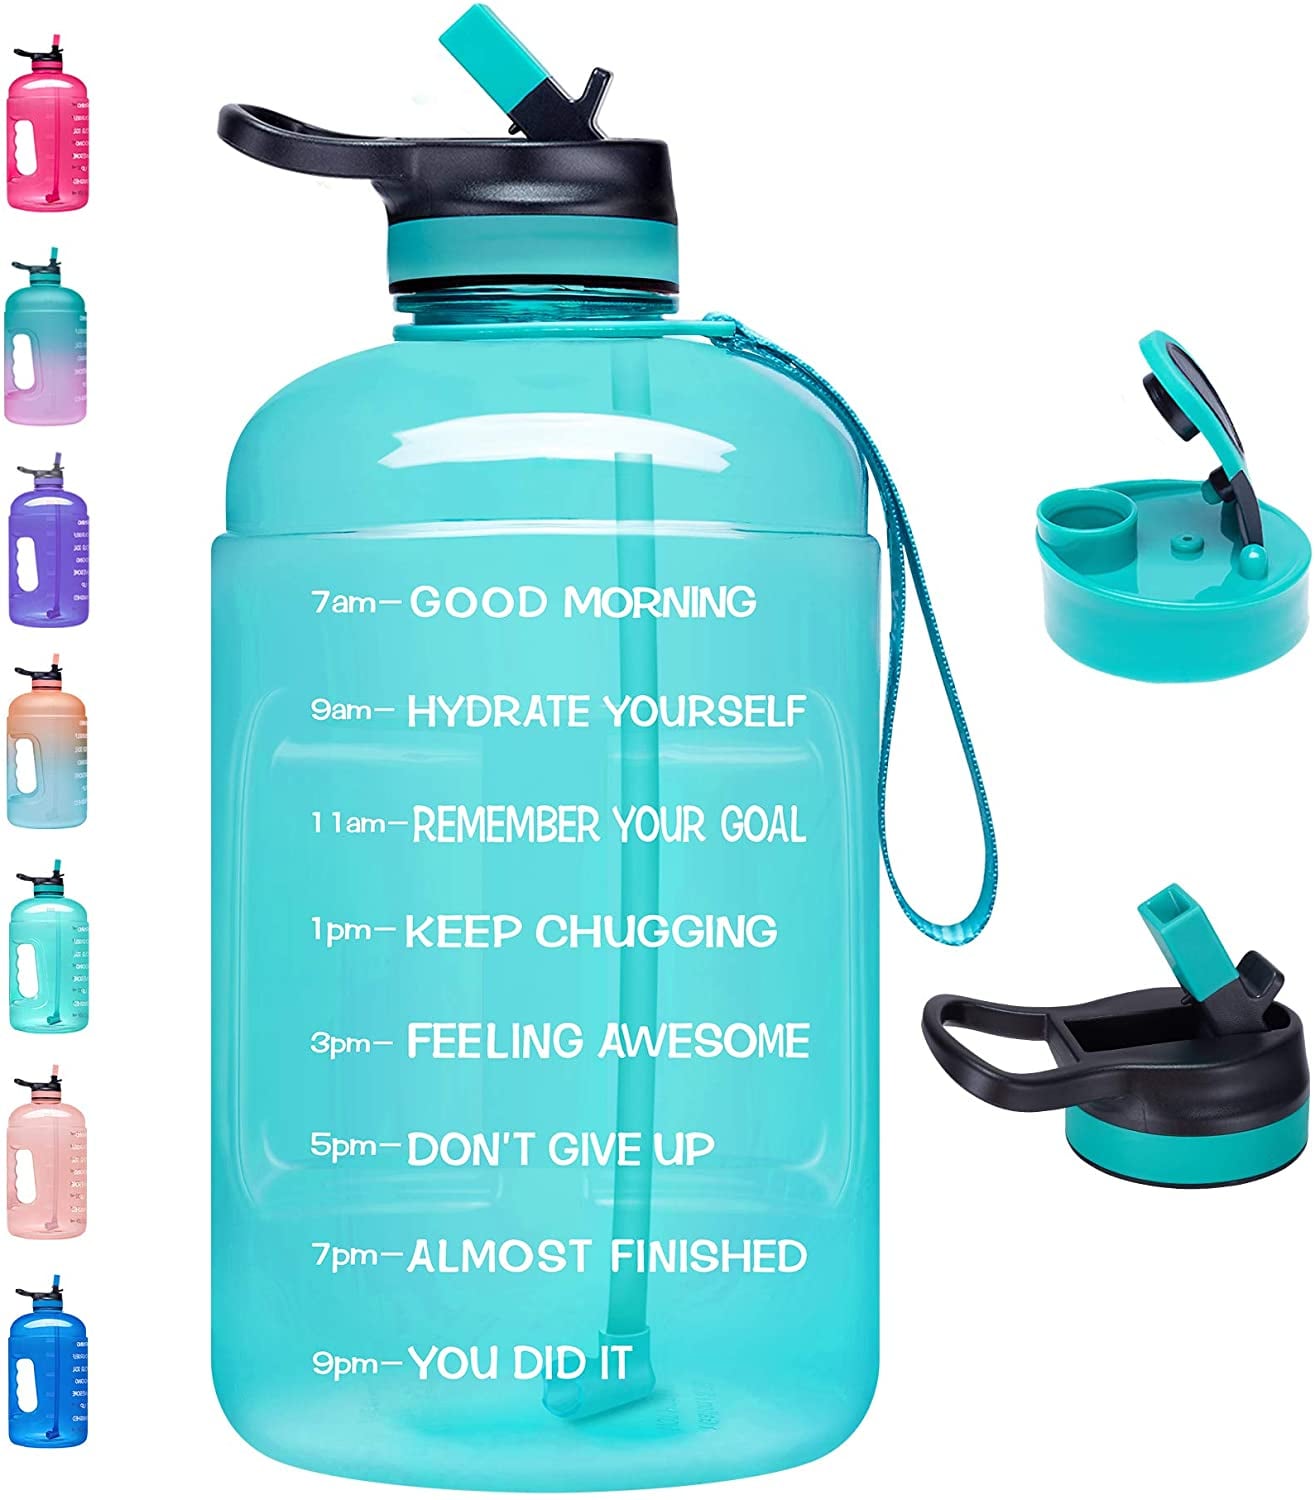 Can a Smart Water Bottle Motivate You to Hydrate? - WSJ